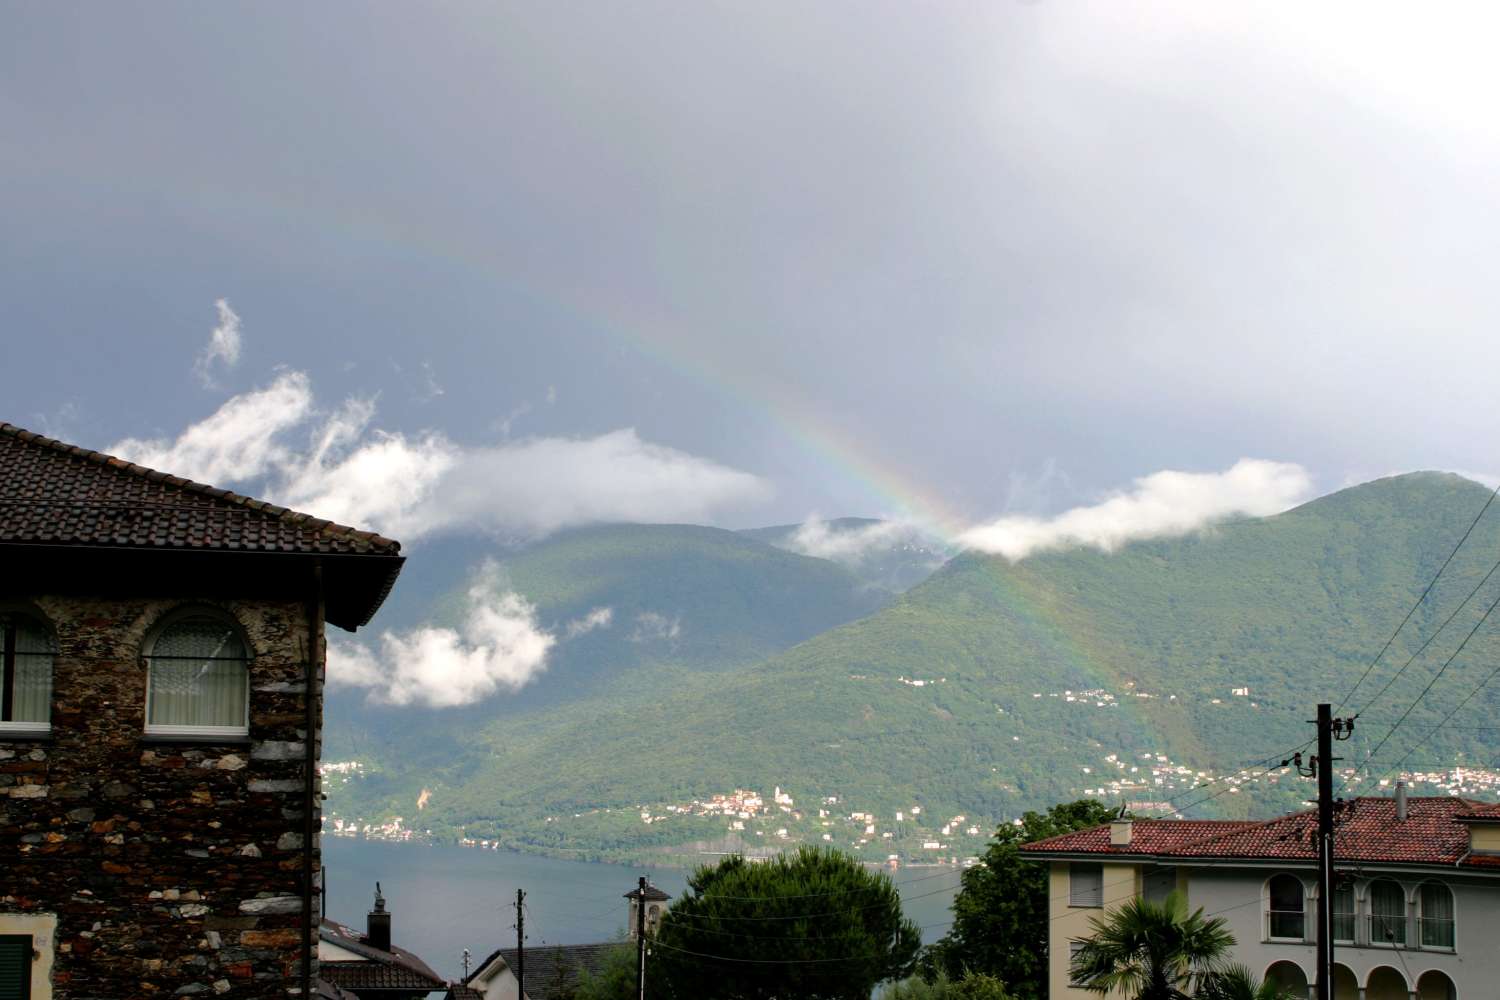 Rainbow over Lago Maggiore: 104 KB; click on the image to enlarge at 1500x1000 pixels